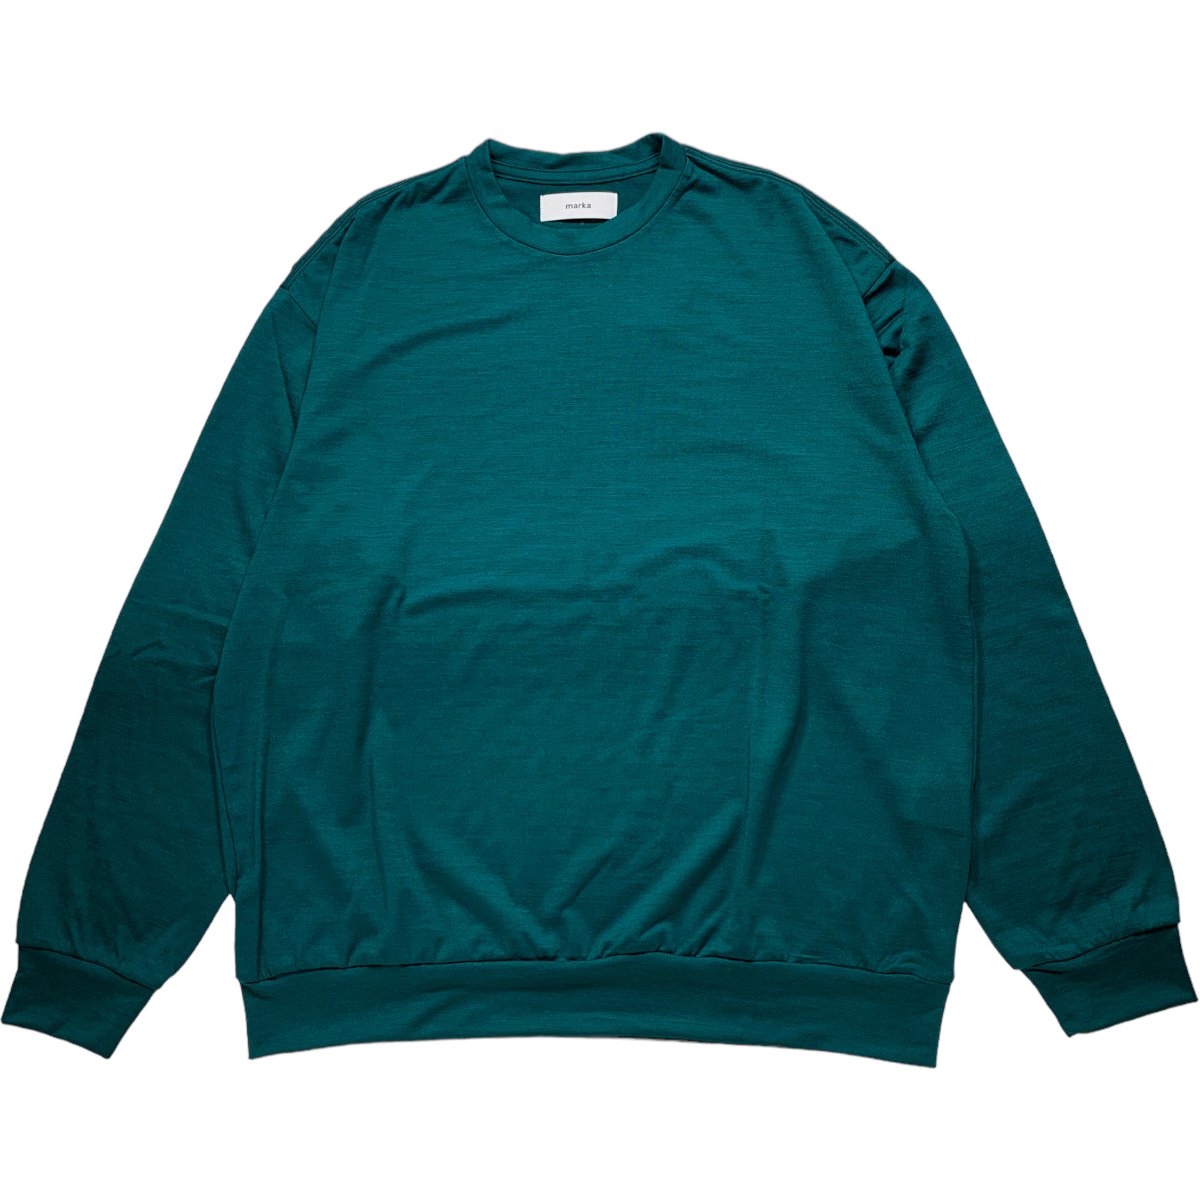 MARKA <BR>CREW NECK - 2/72 WOOL SINGLE JERSEY WASHABLE -(GREEN)